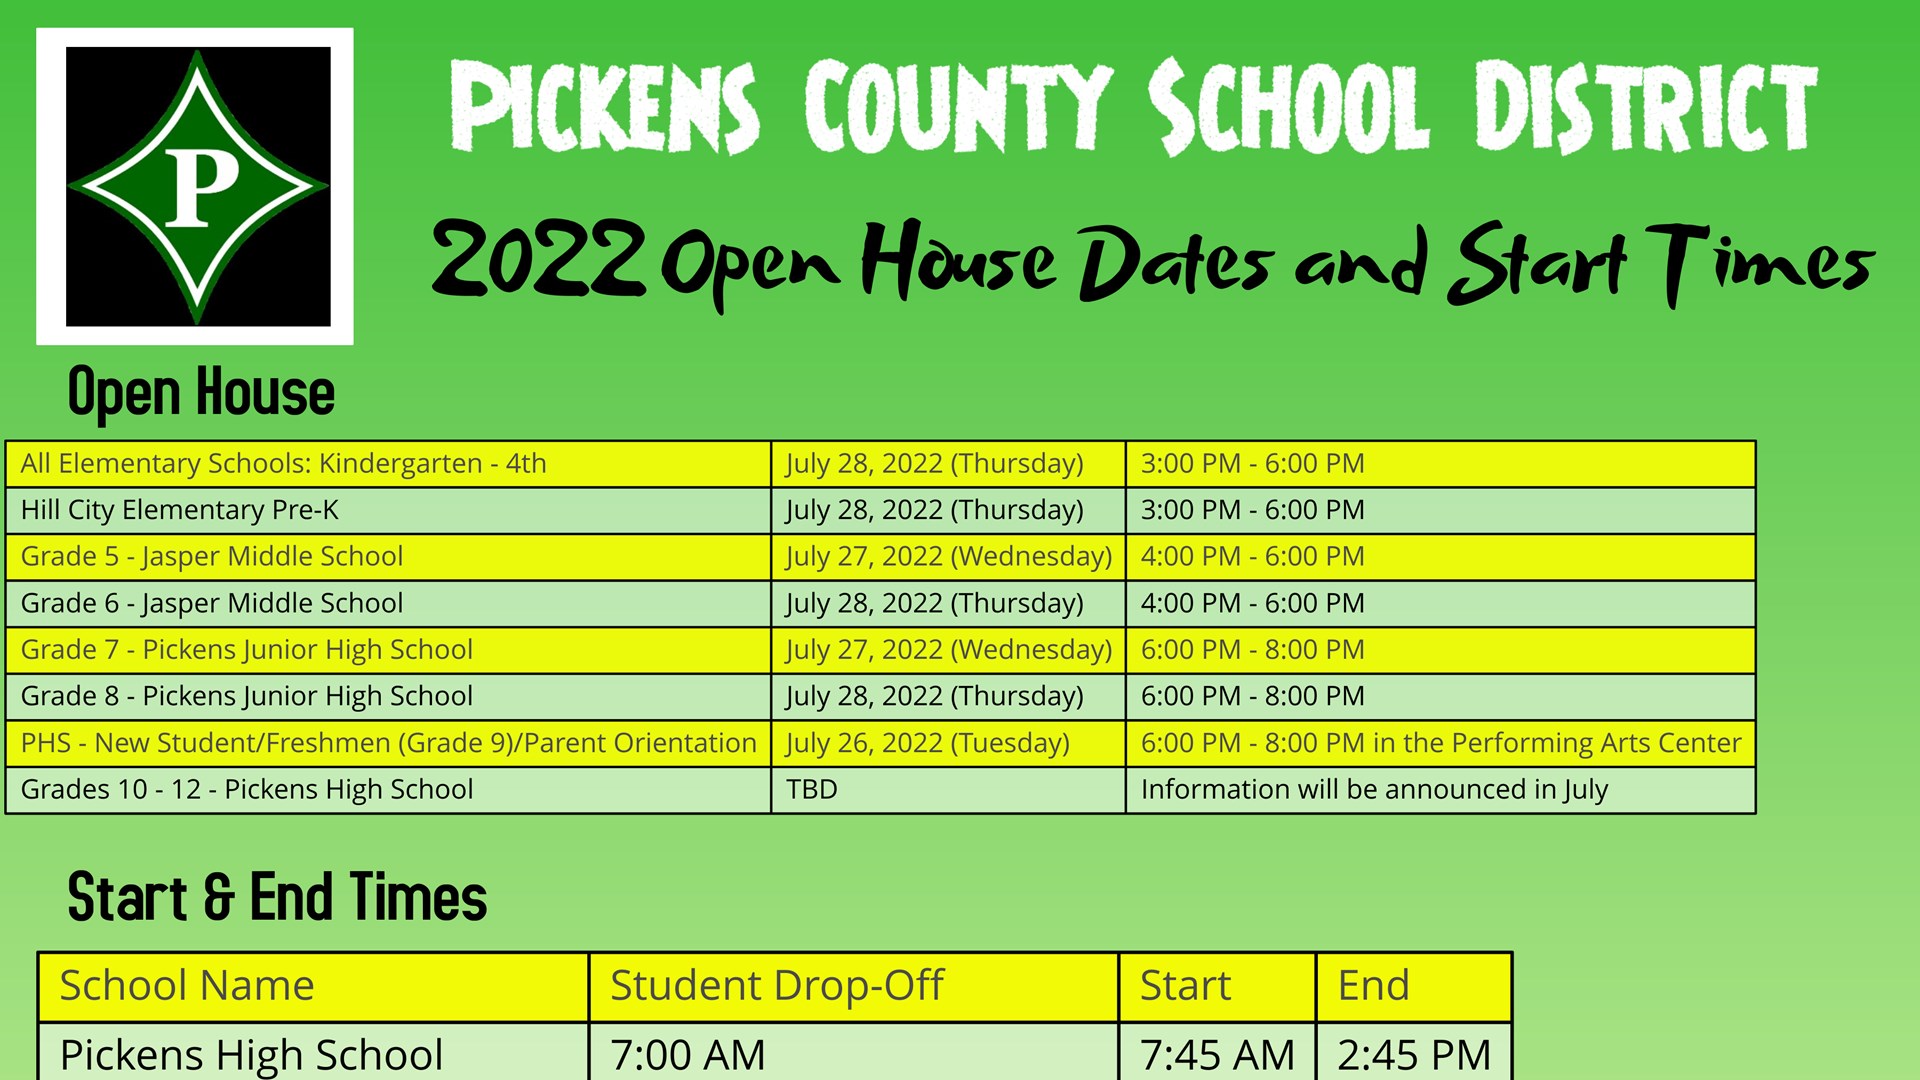 Open House Dates & Times